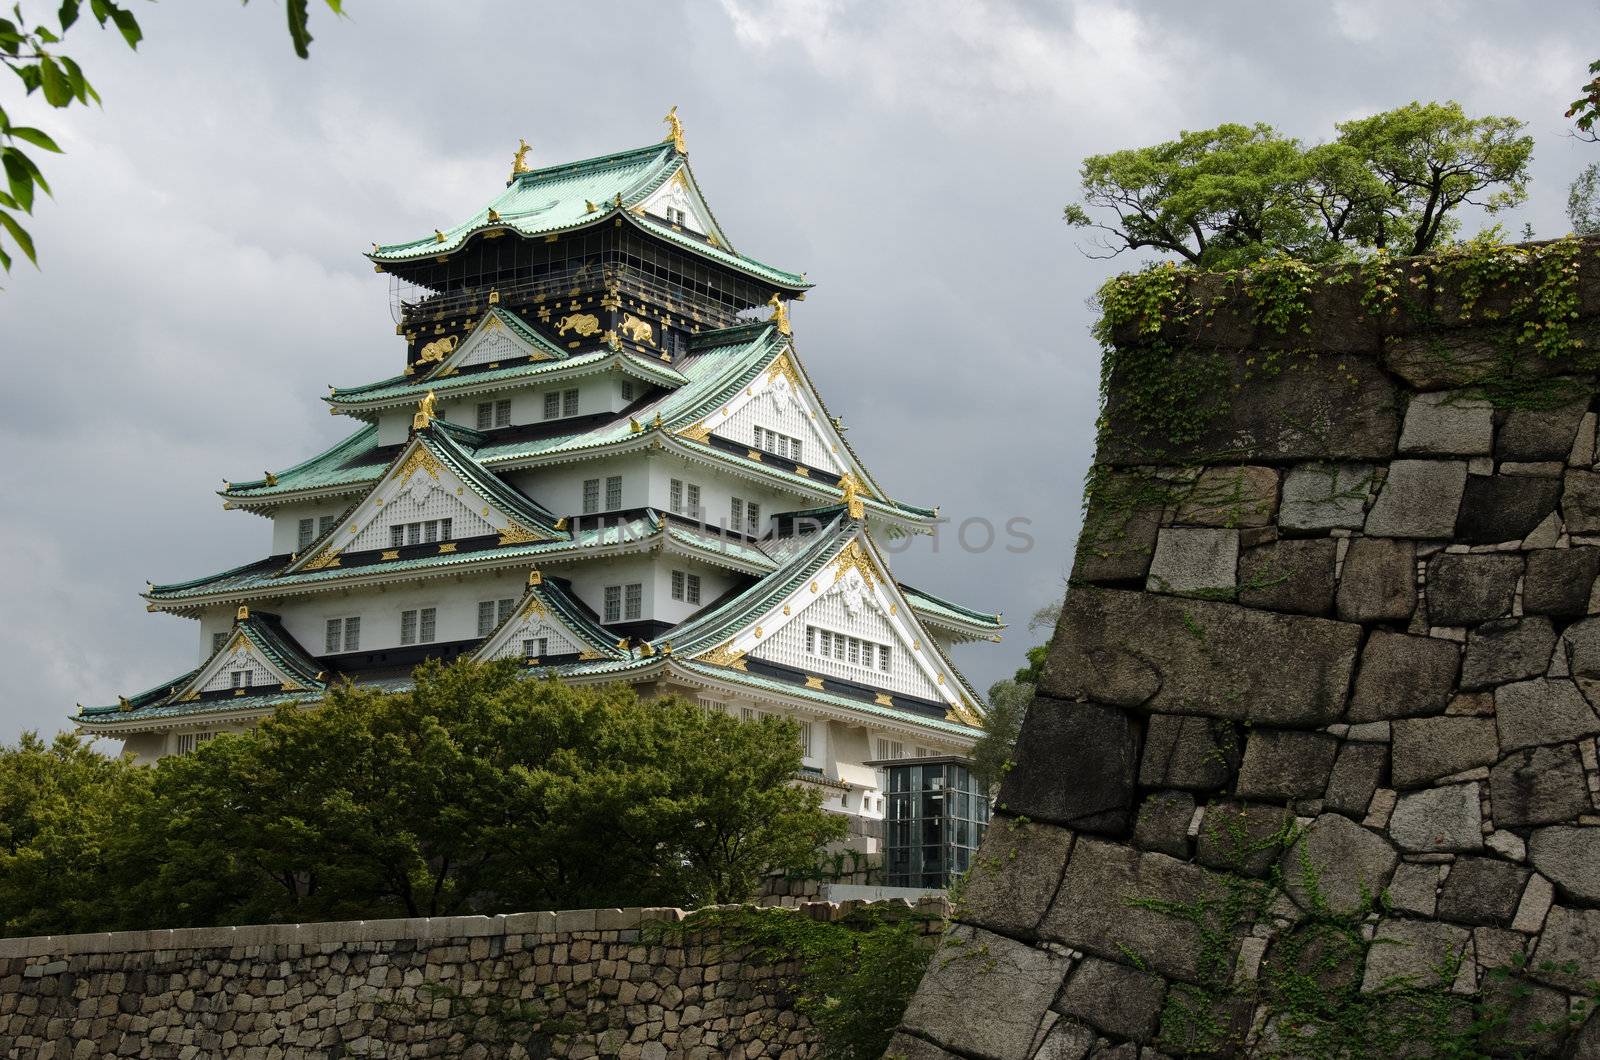 The Osaka castle, one of the most famous castles of Japan